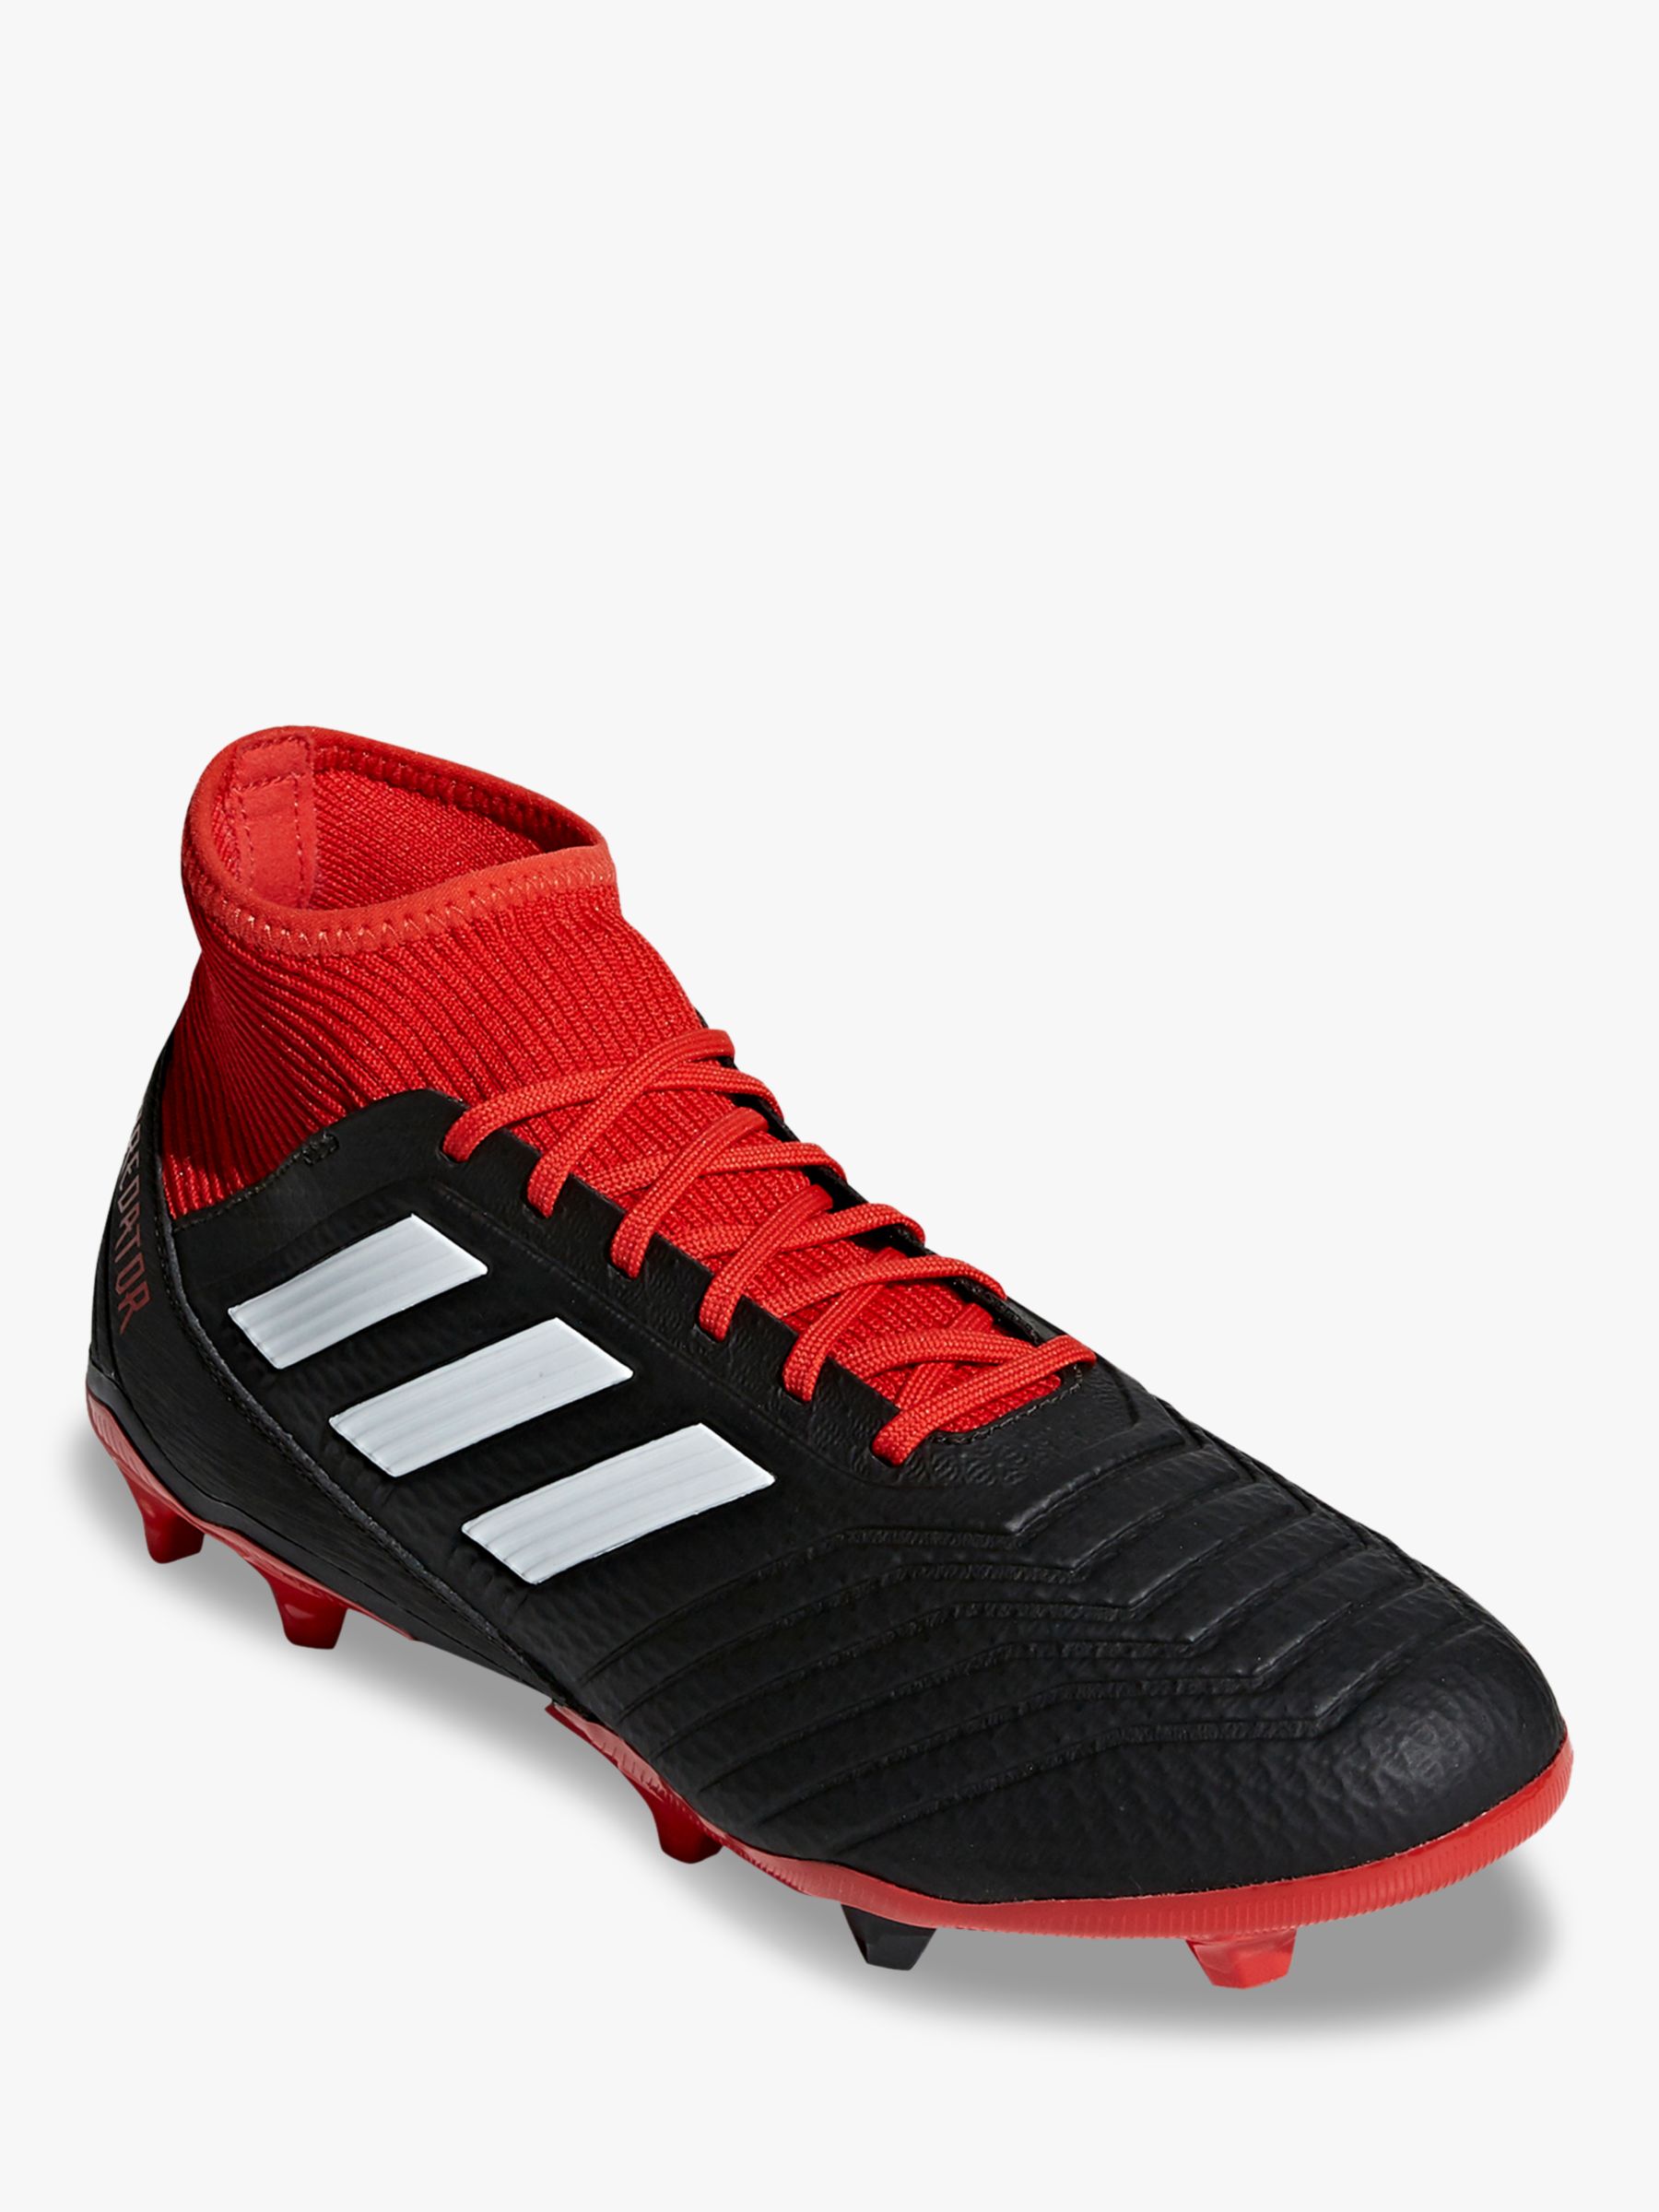 adidas red football boots